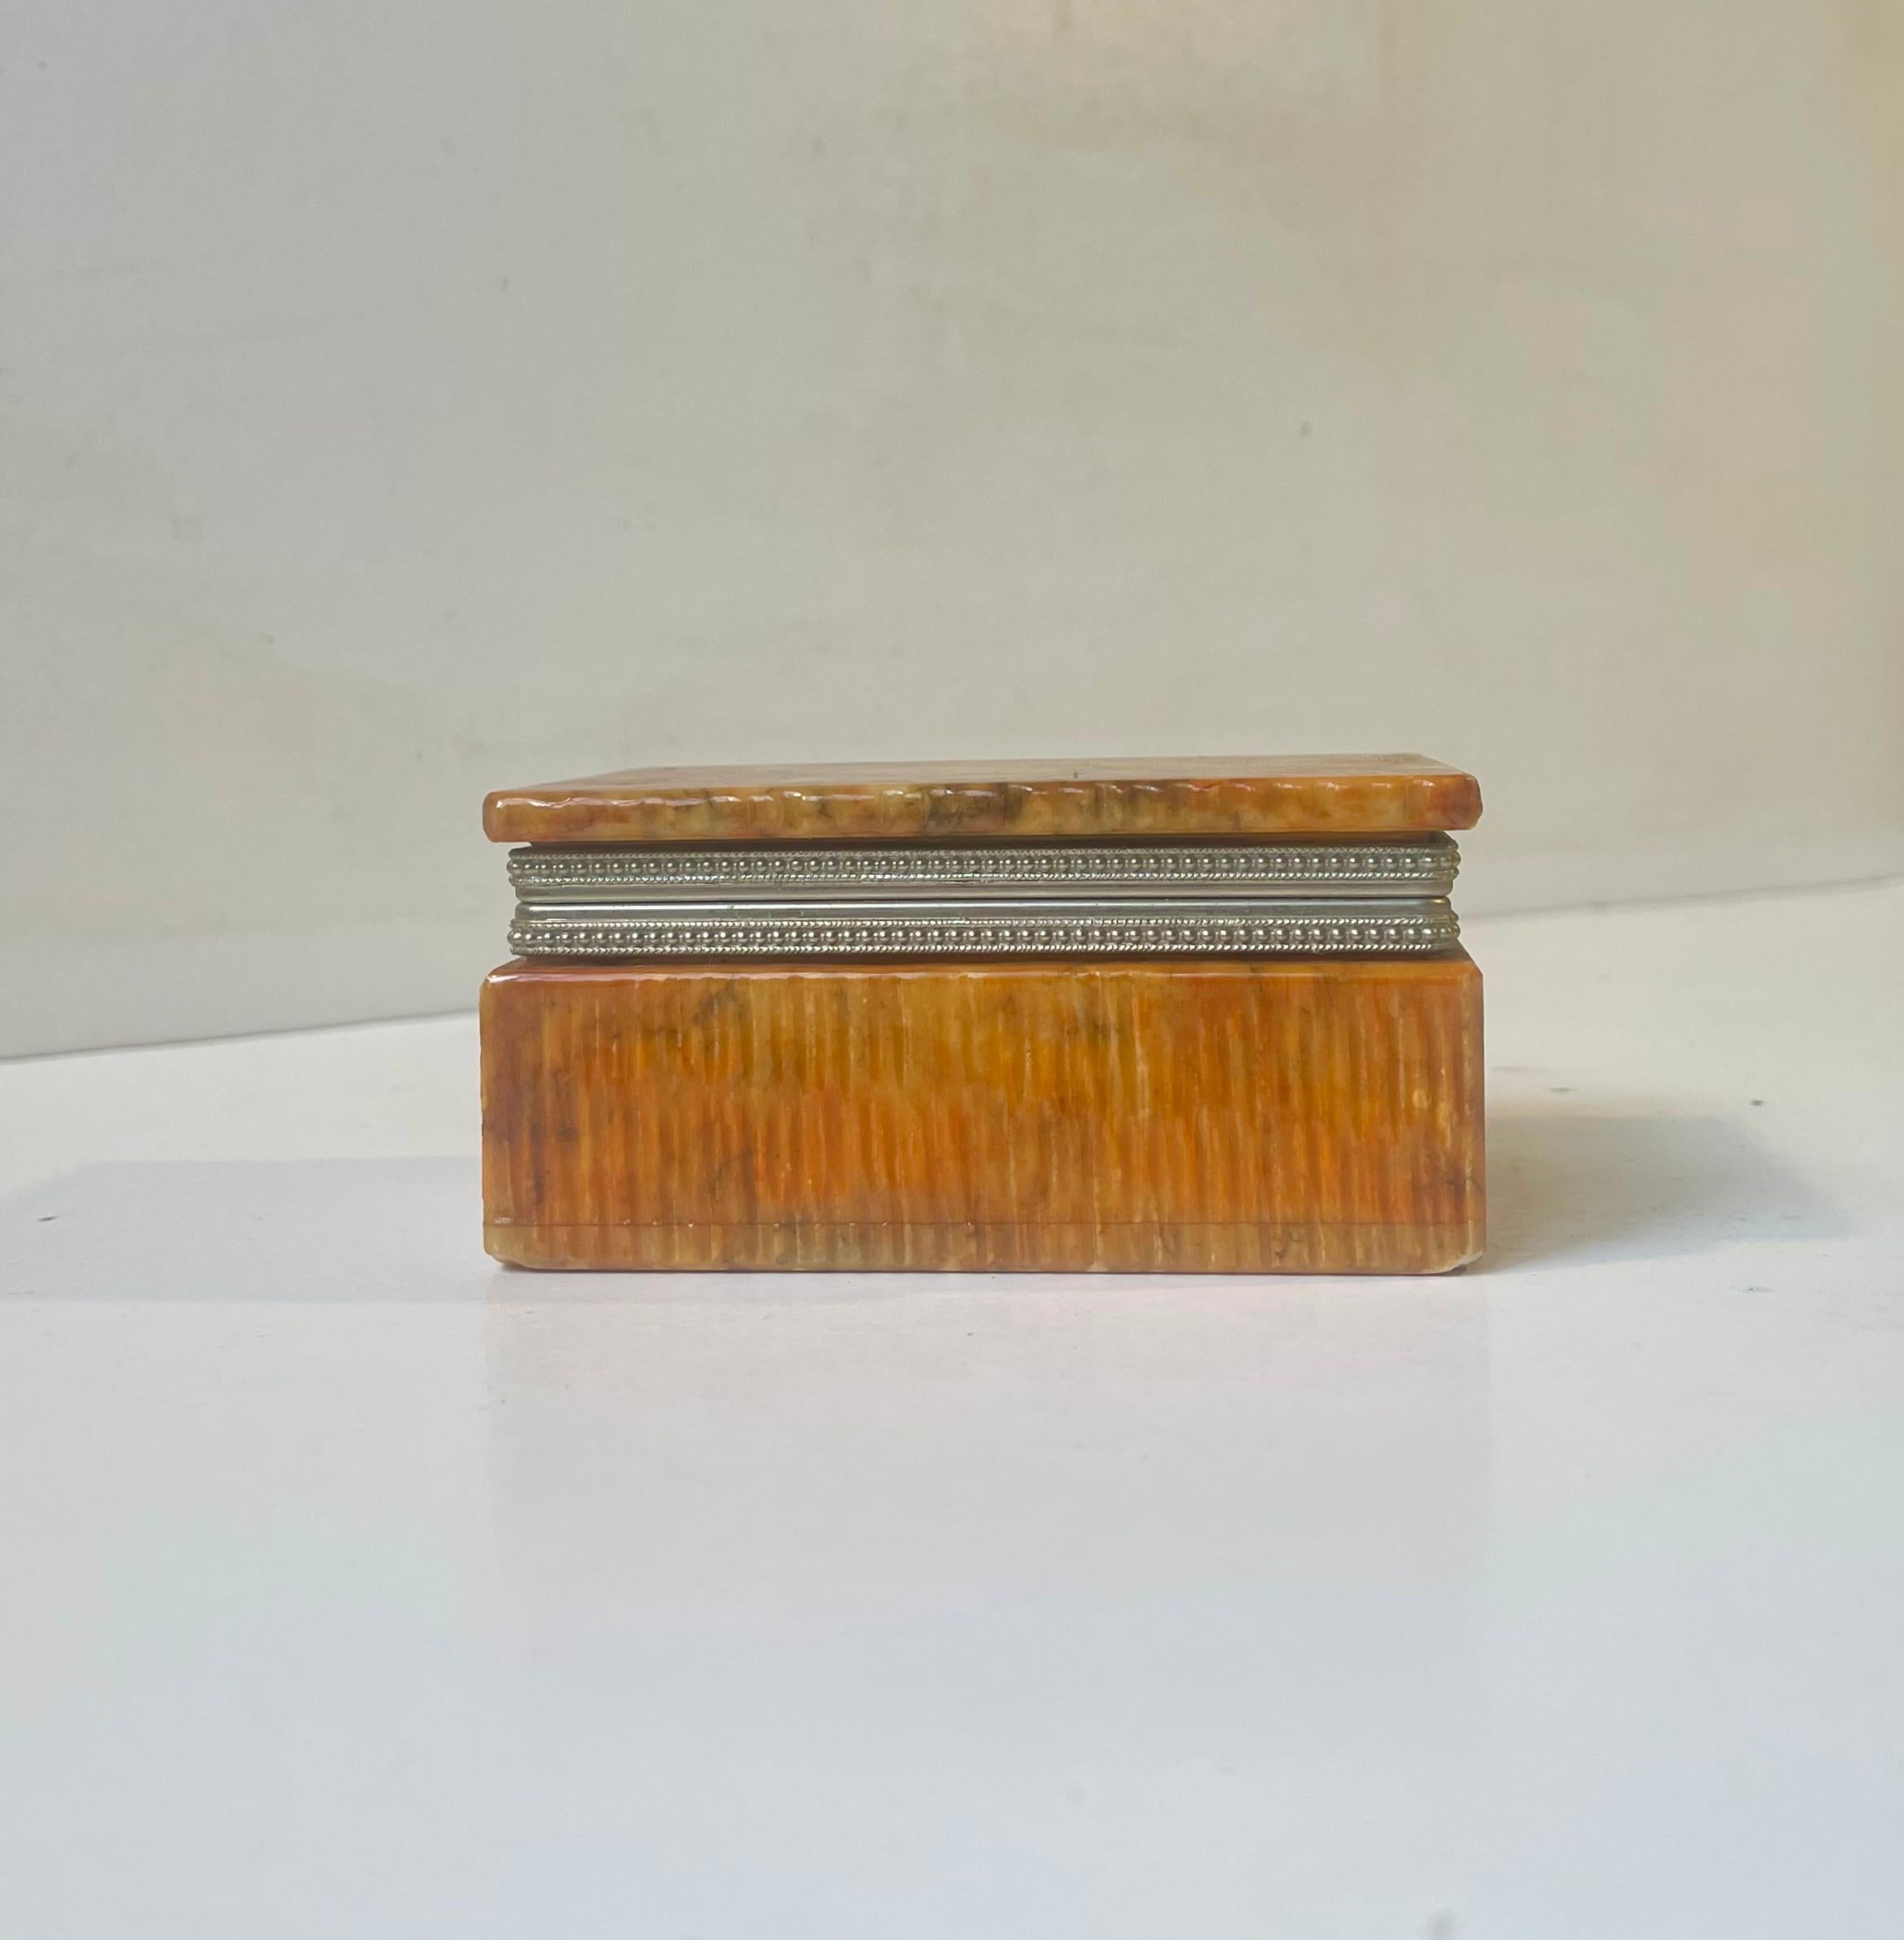 Decorative natural orange alabaster stone trinket, cigar, jewelry, vanity or cigarette box. Hand-made in Italy during the 1970s by Romano Bianchi. Measurements: 11x8x5 cm.

